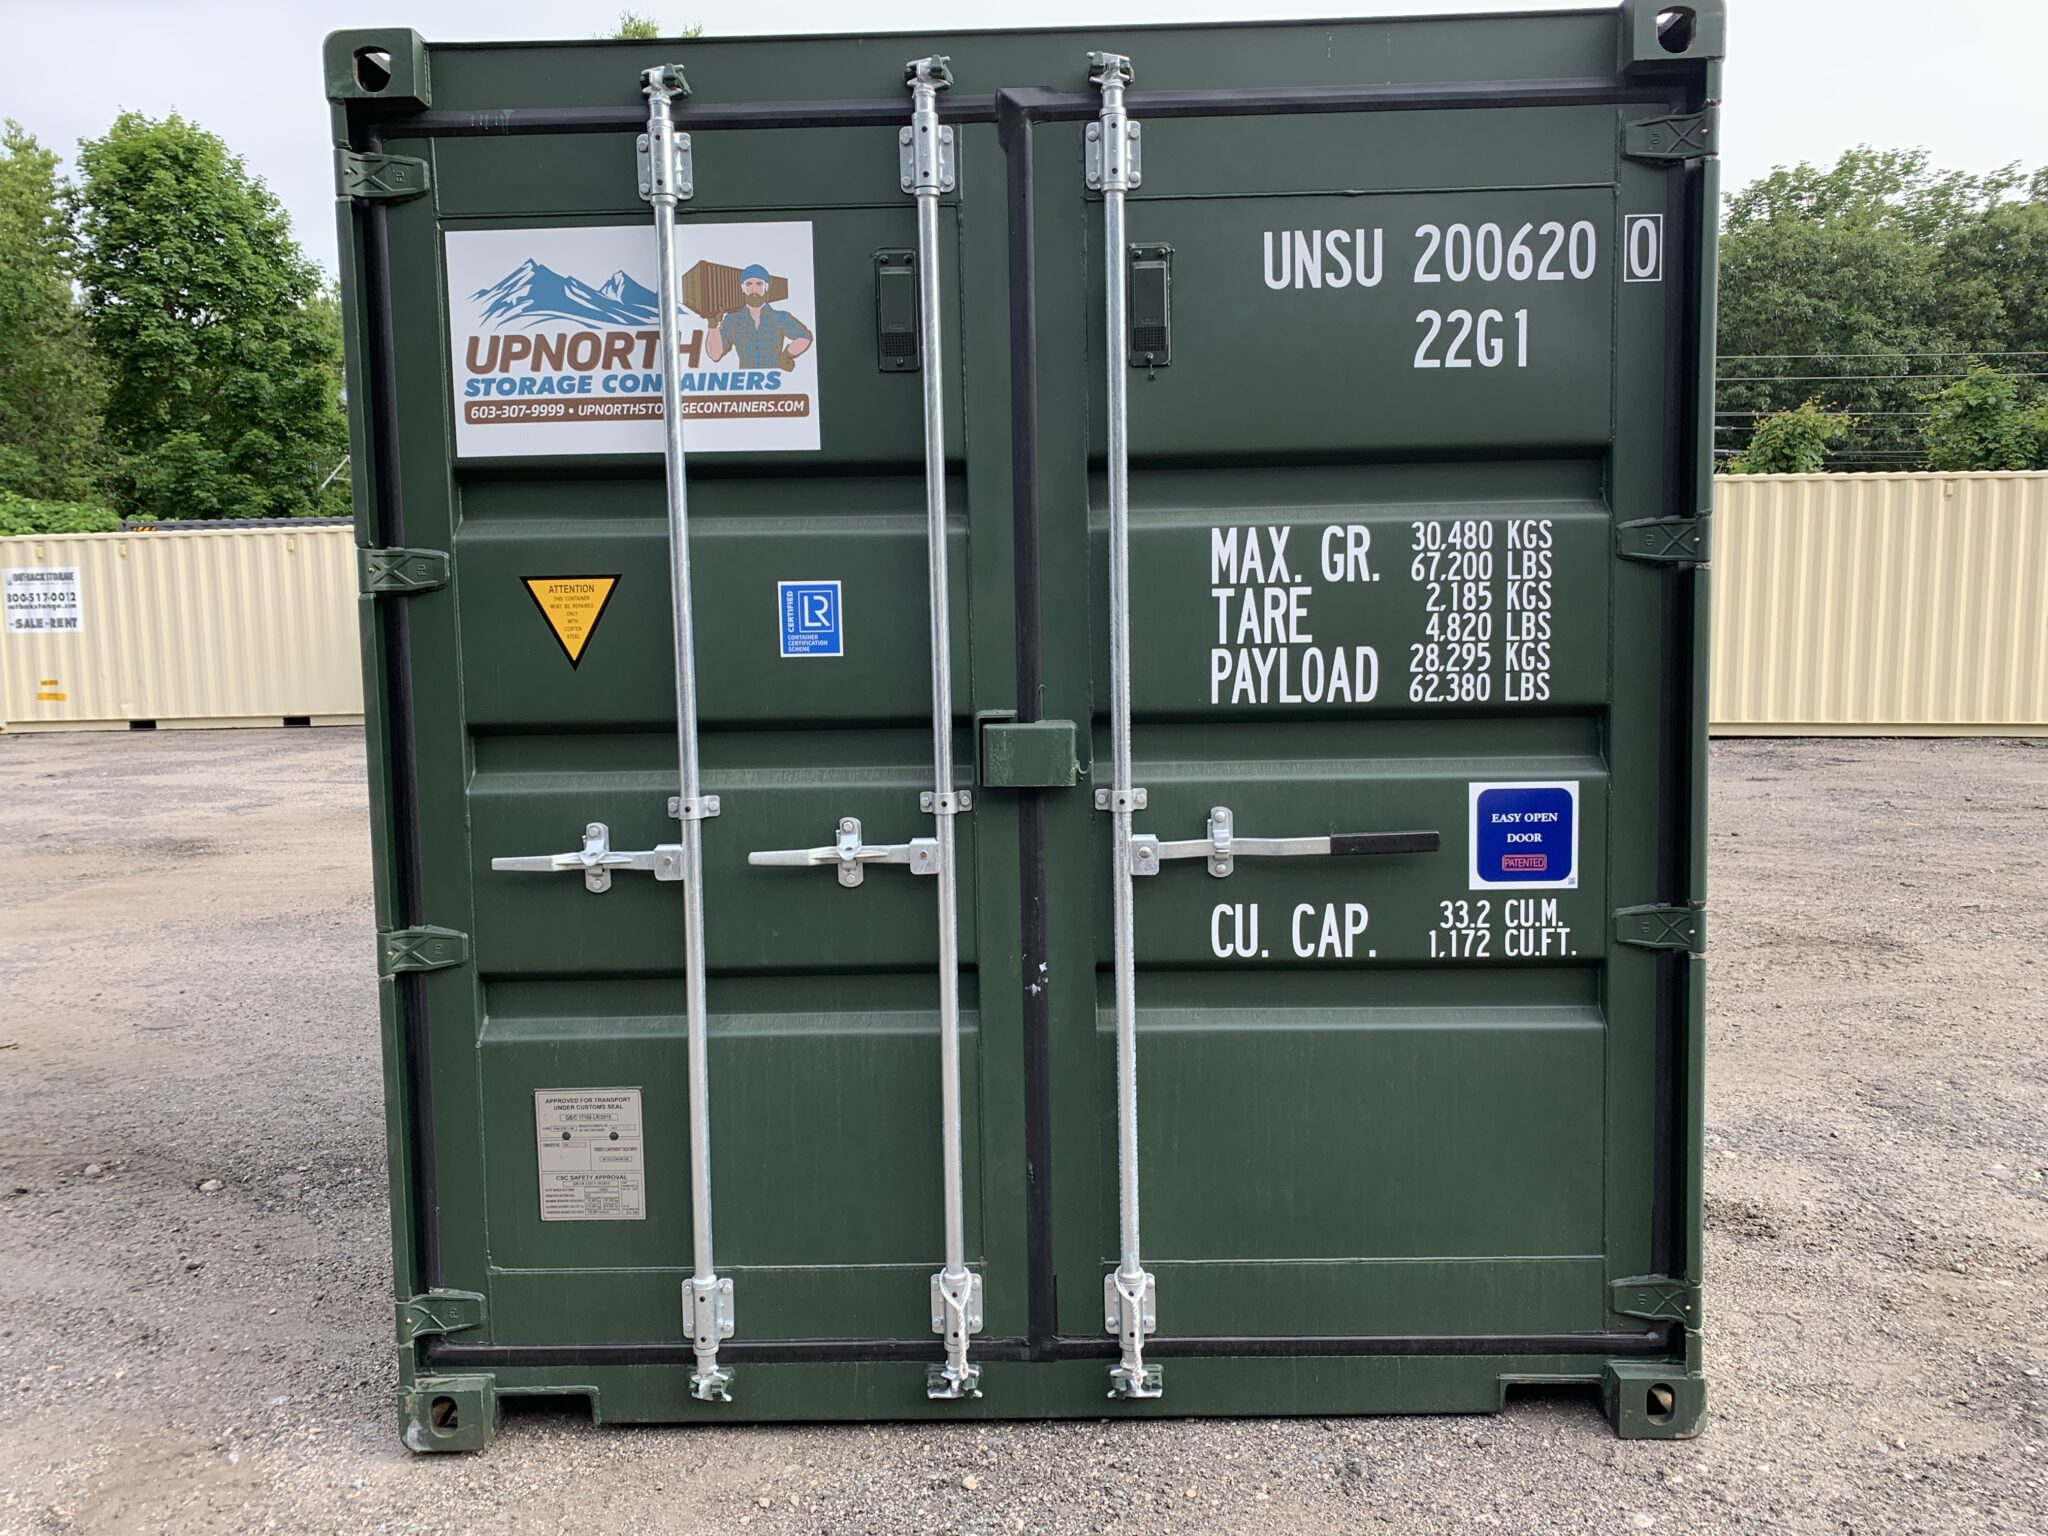 10′ x 8′ x 8.5′ Tall– New Shipping/Storage Container – Wind and